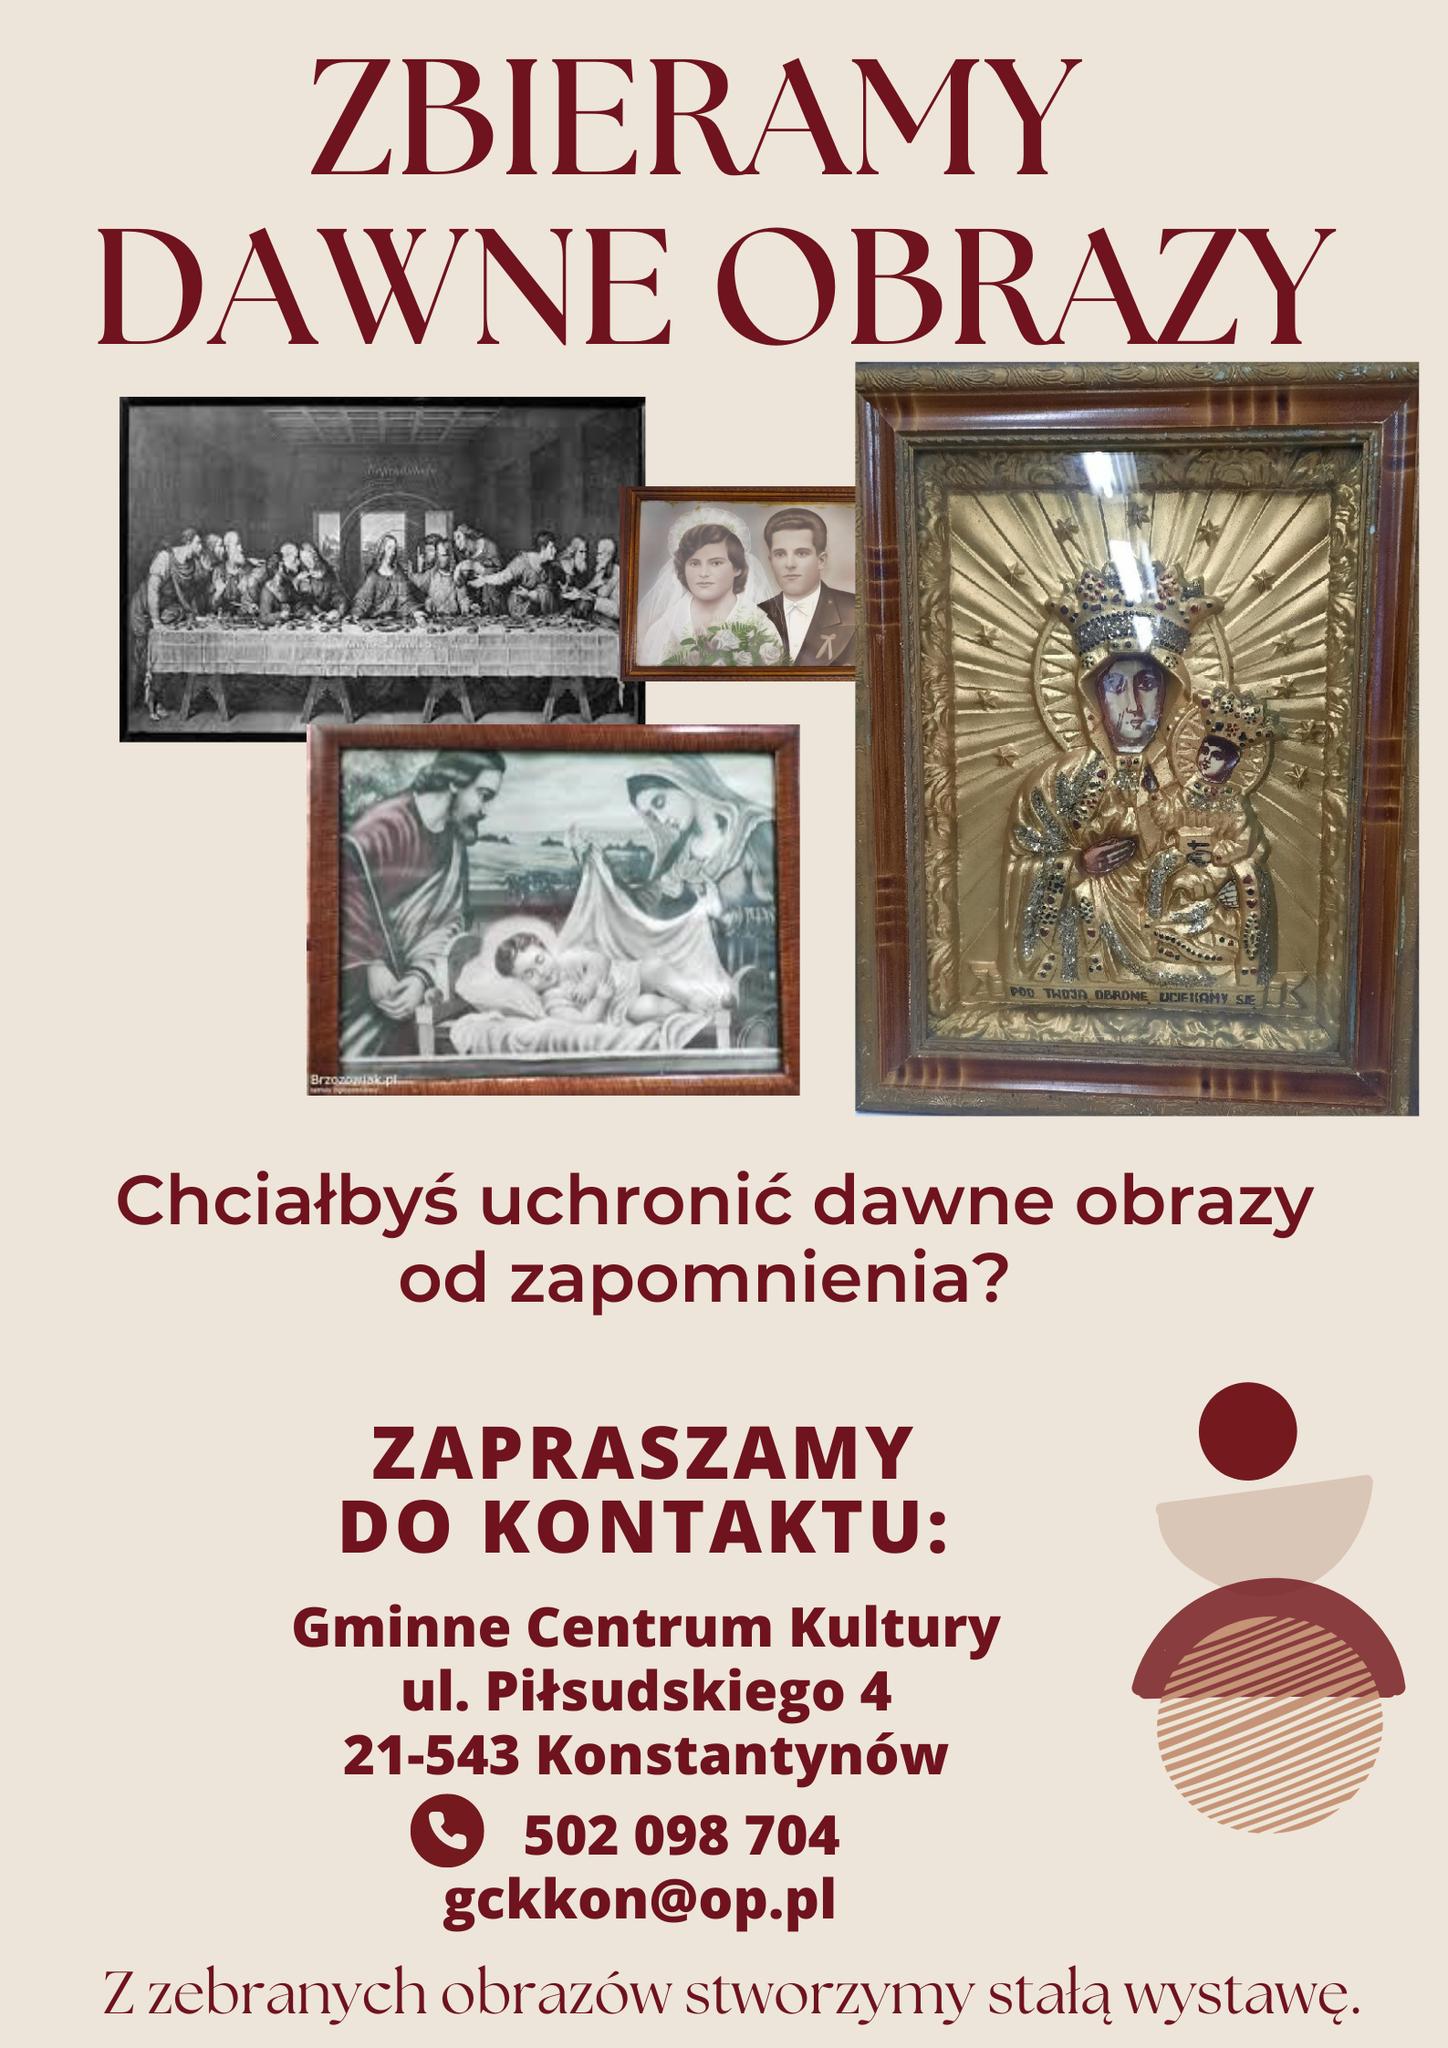 You are currently viewing ZBIERAMY DAWNE OBRAZY